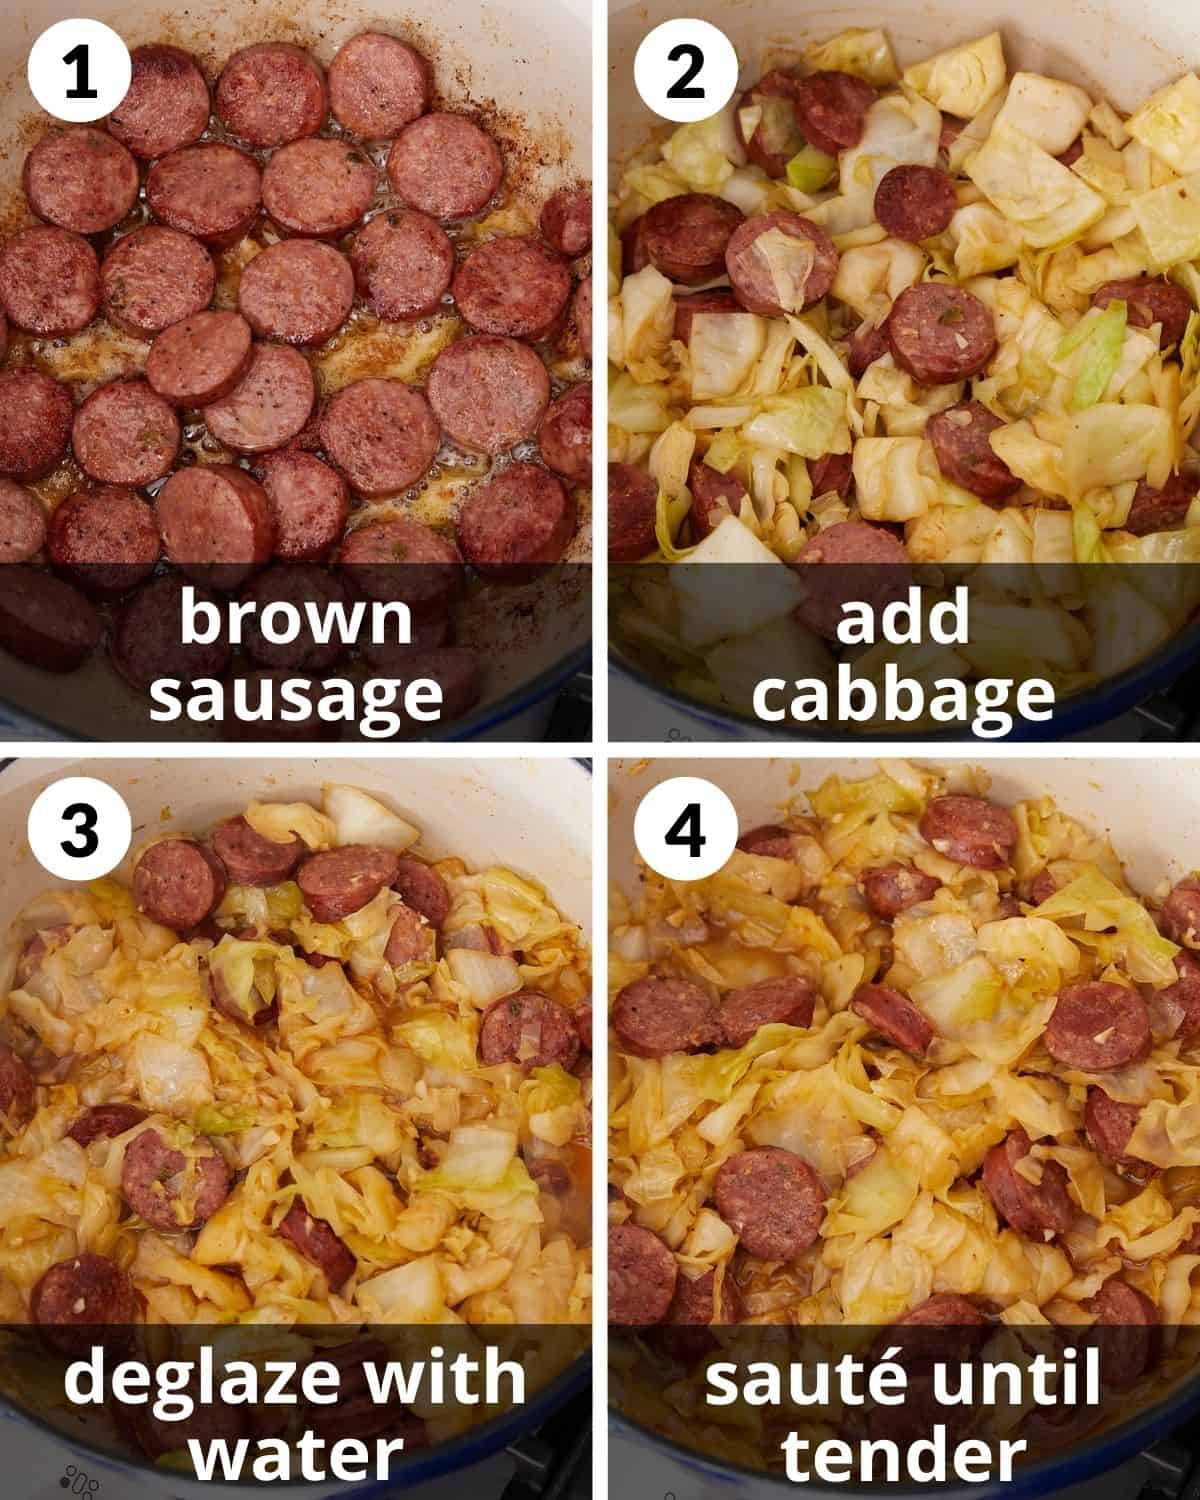 A 4 image collage showing the assembly of smoked sausage and cabbage recipe.